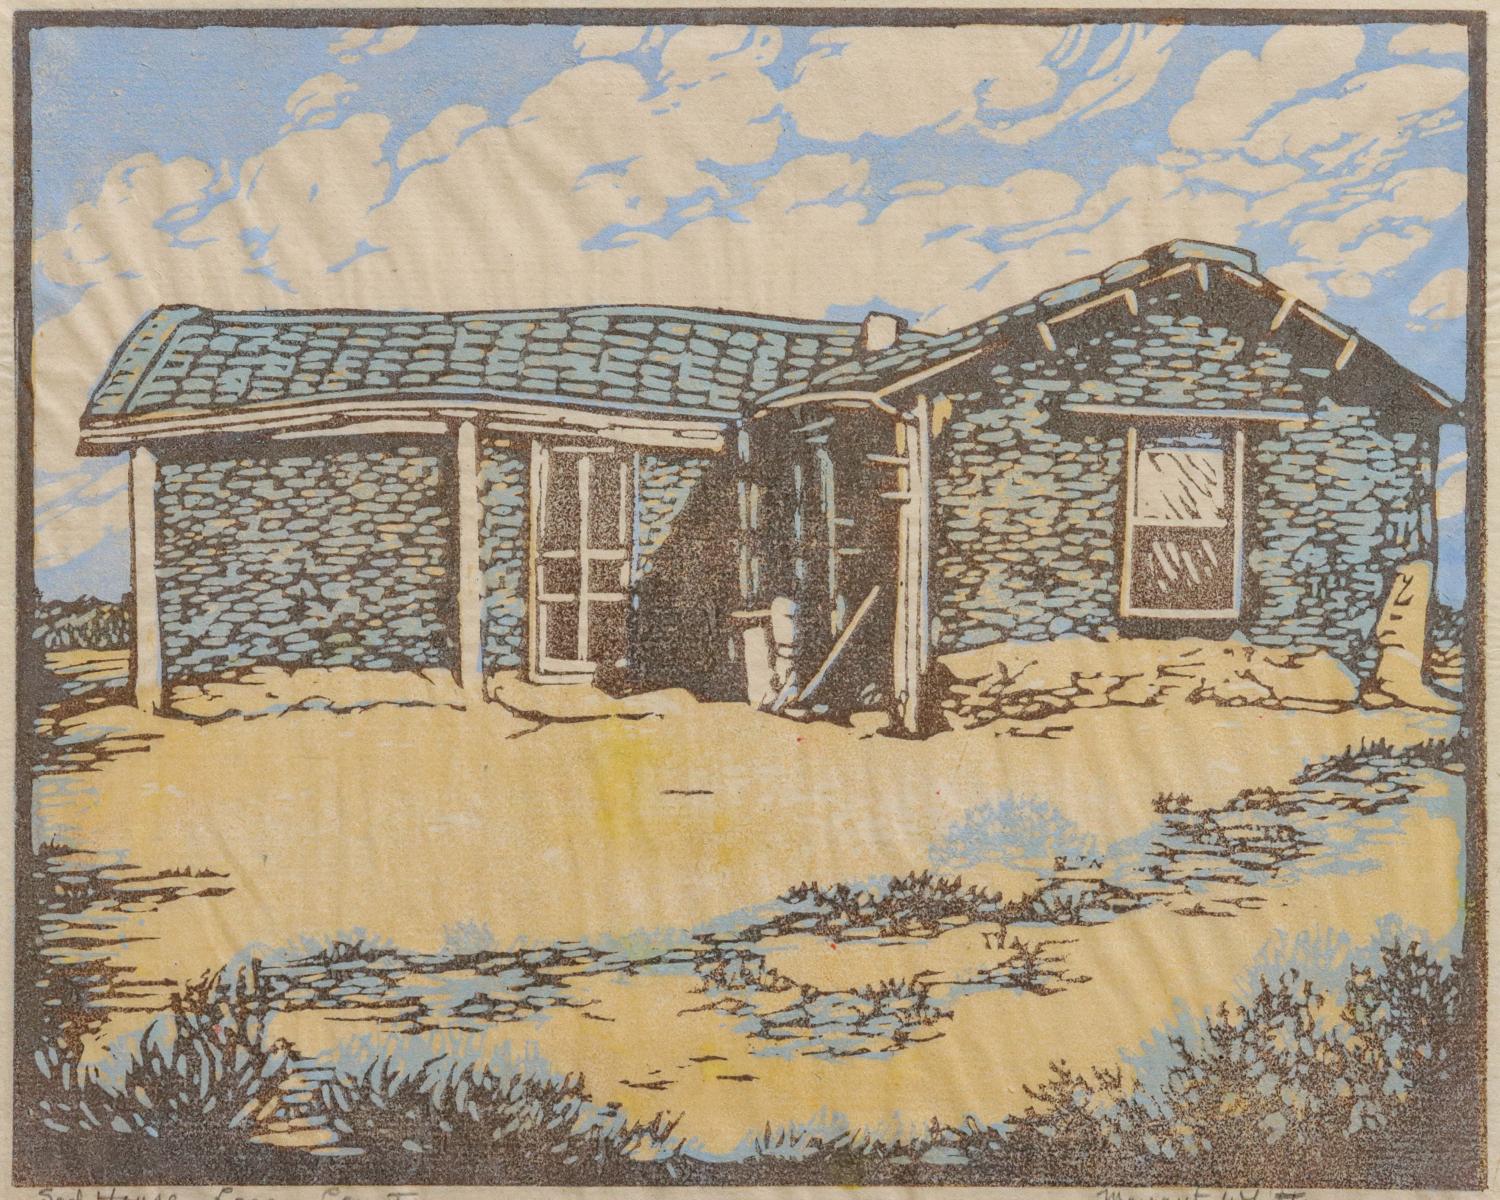 MARGARET WHITTEMORE (1897-1983) PENCIL-SIGNED WOODBLOCK